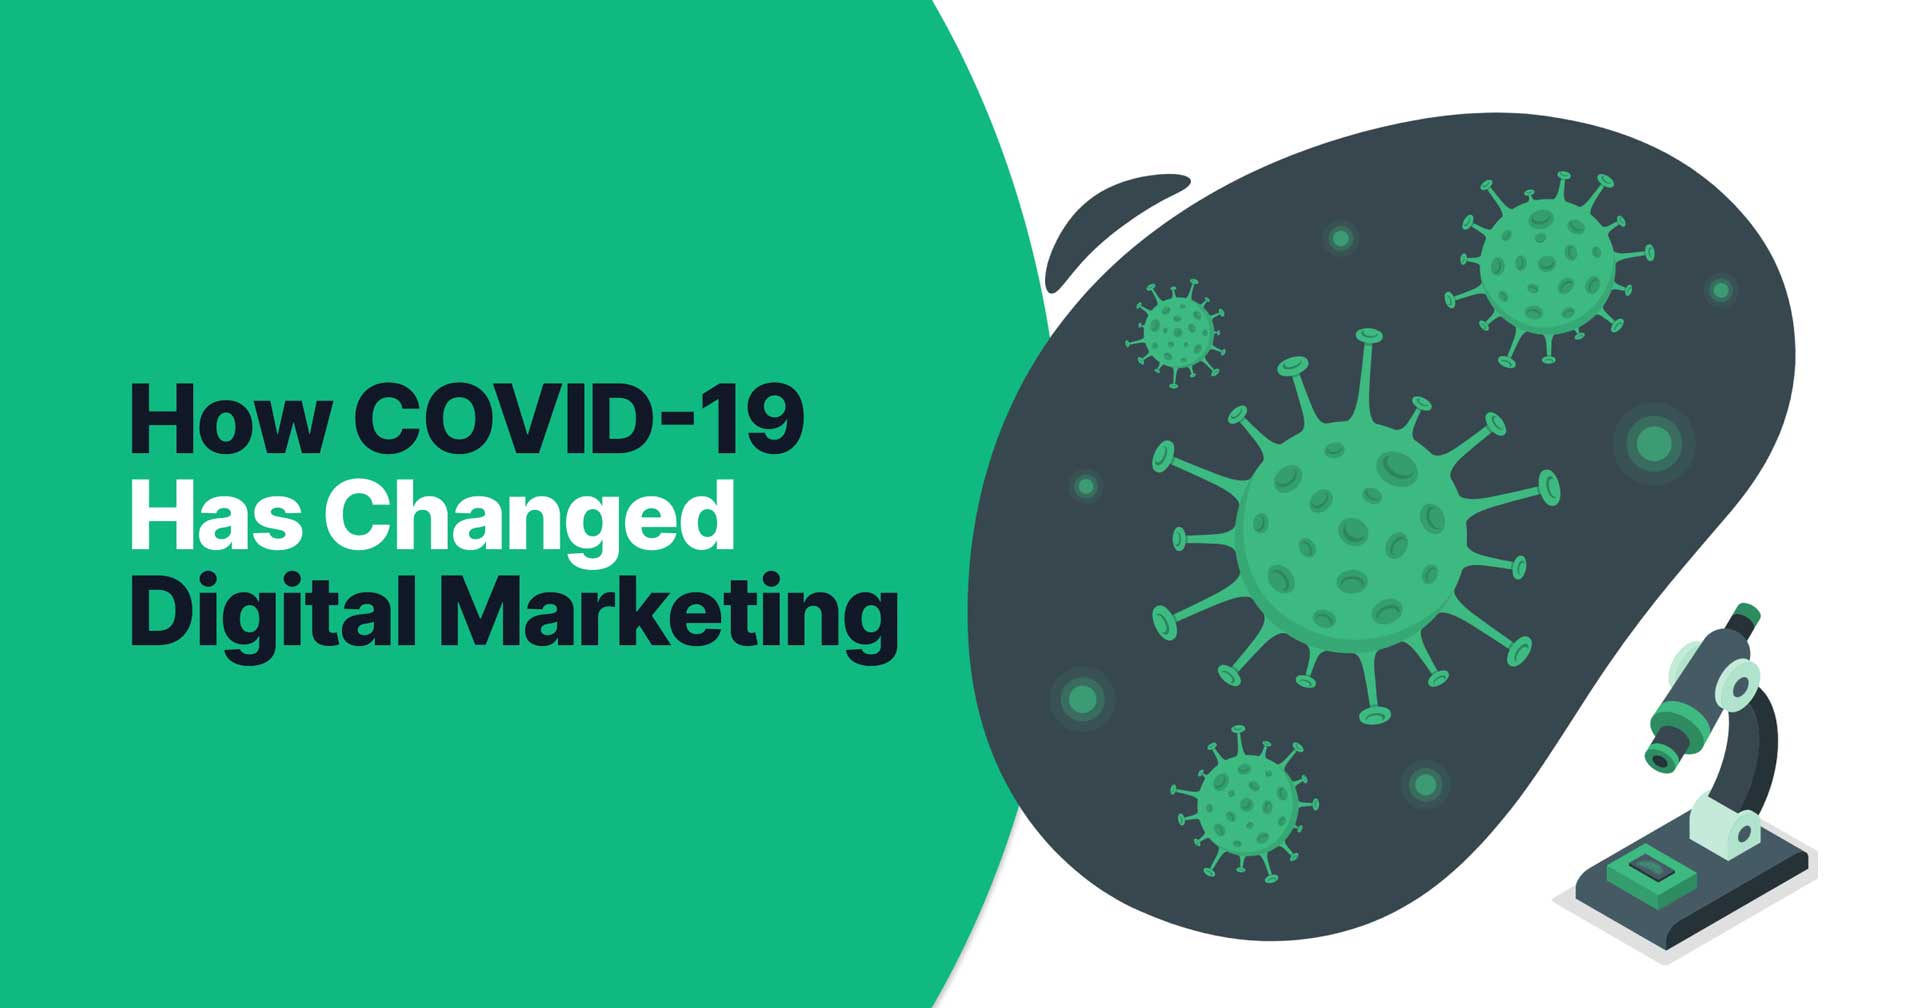 Digital Marketing Before and After Pandemic